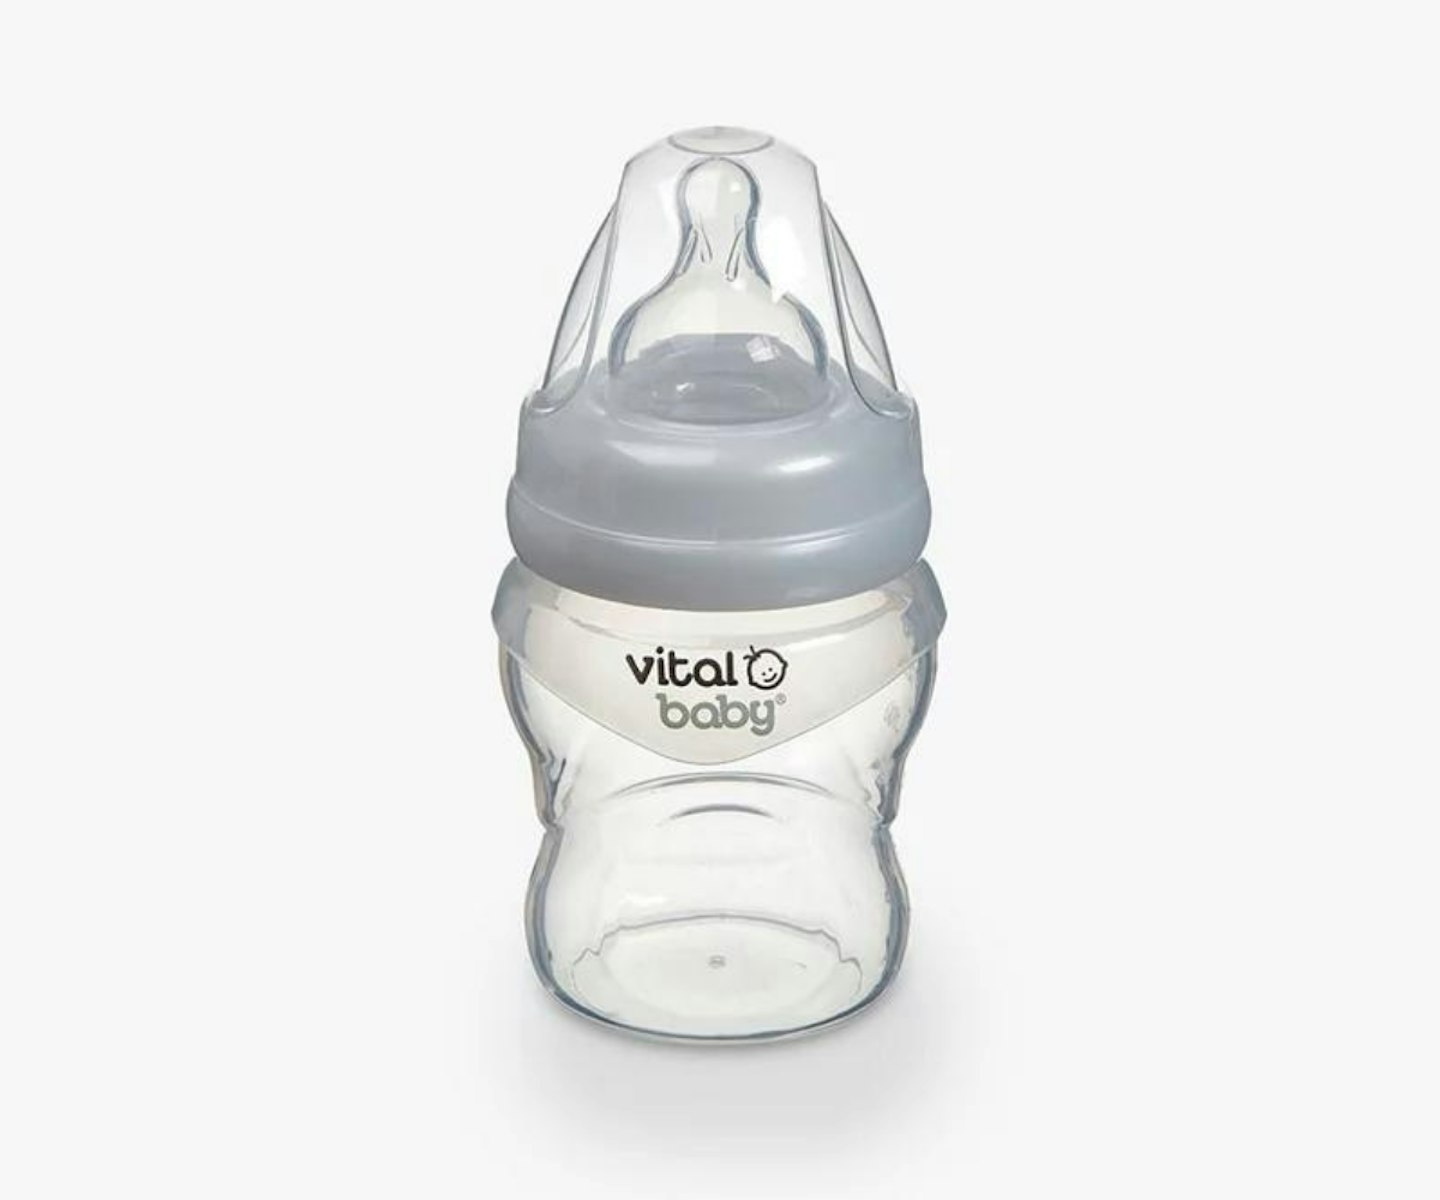 Tommee Tippee Advanced Anti-Colic Baby Bottle